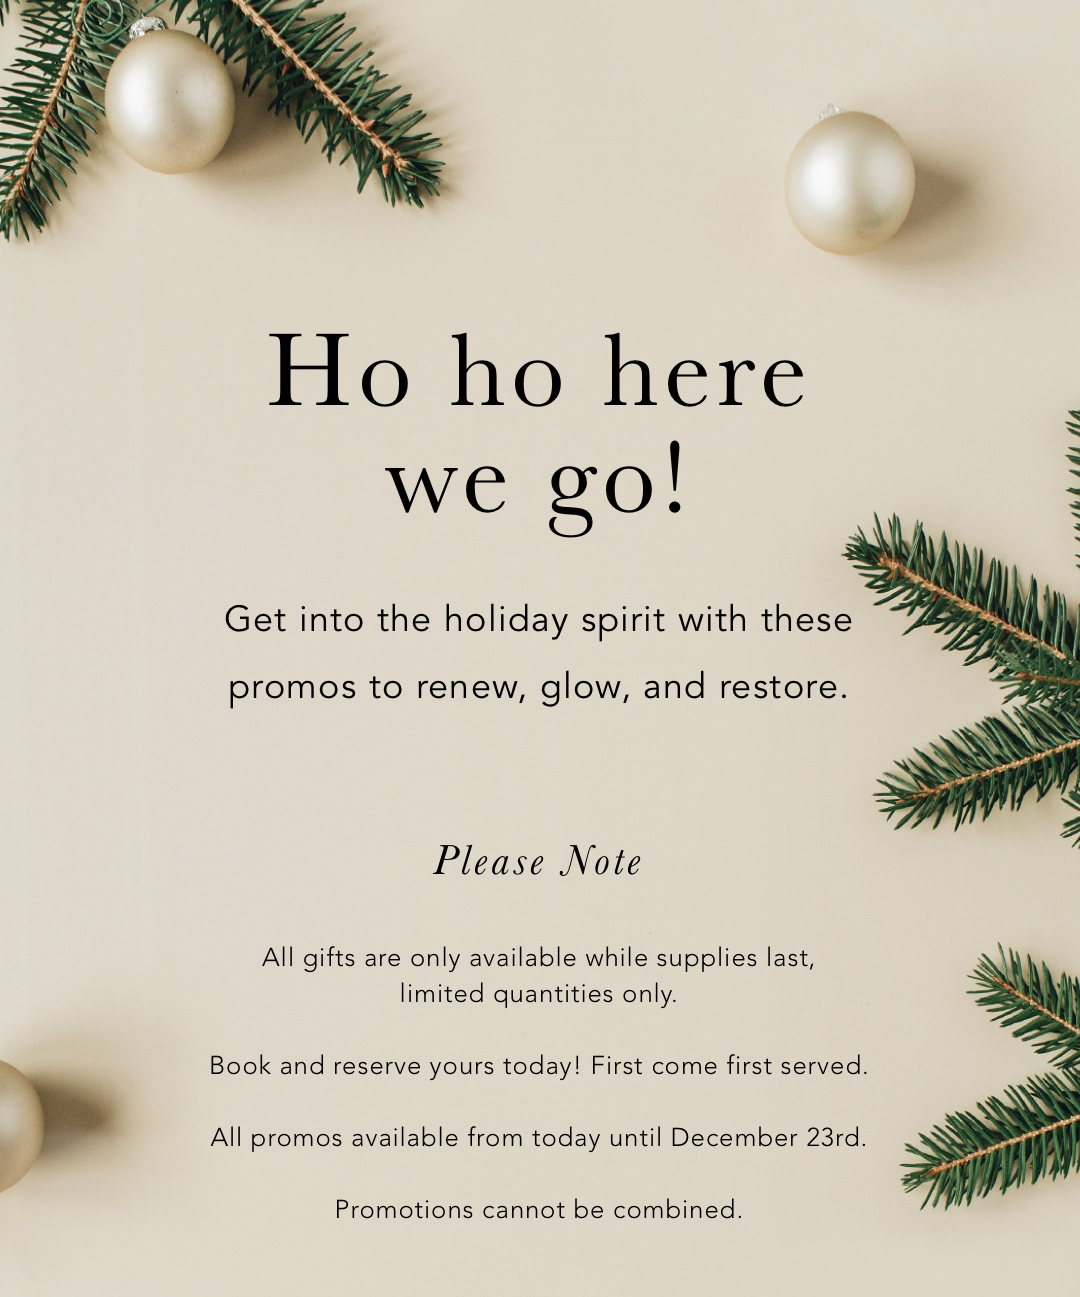 An introduction to our holiday email with pine needles